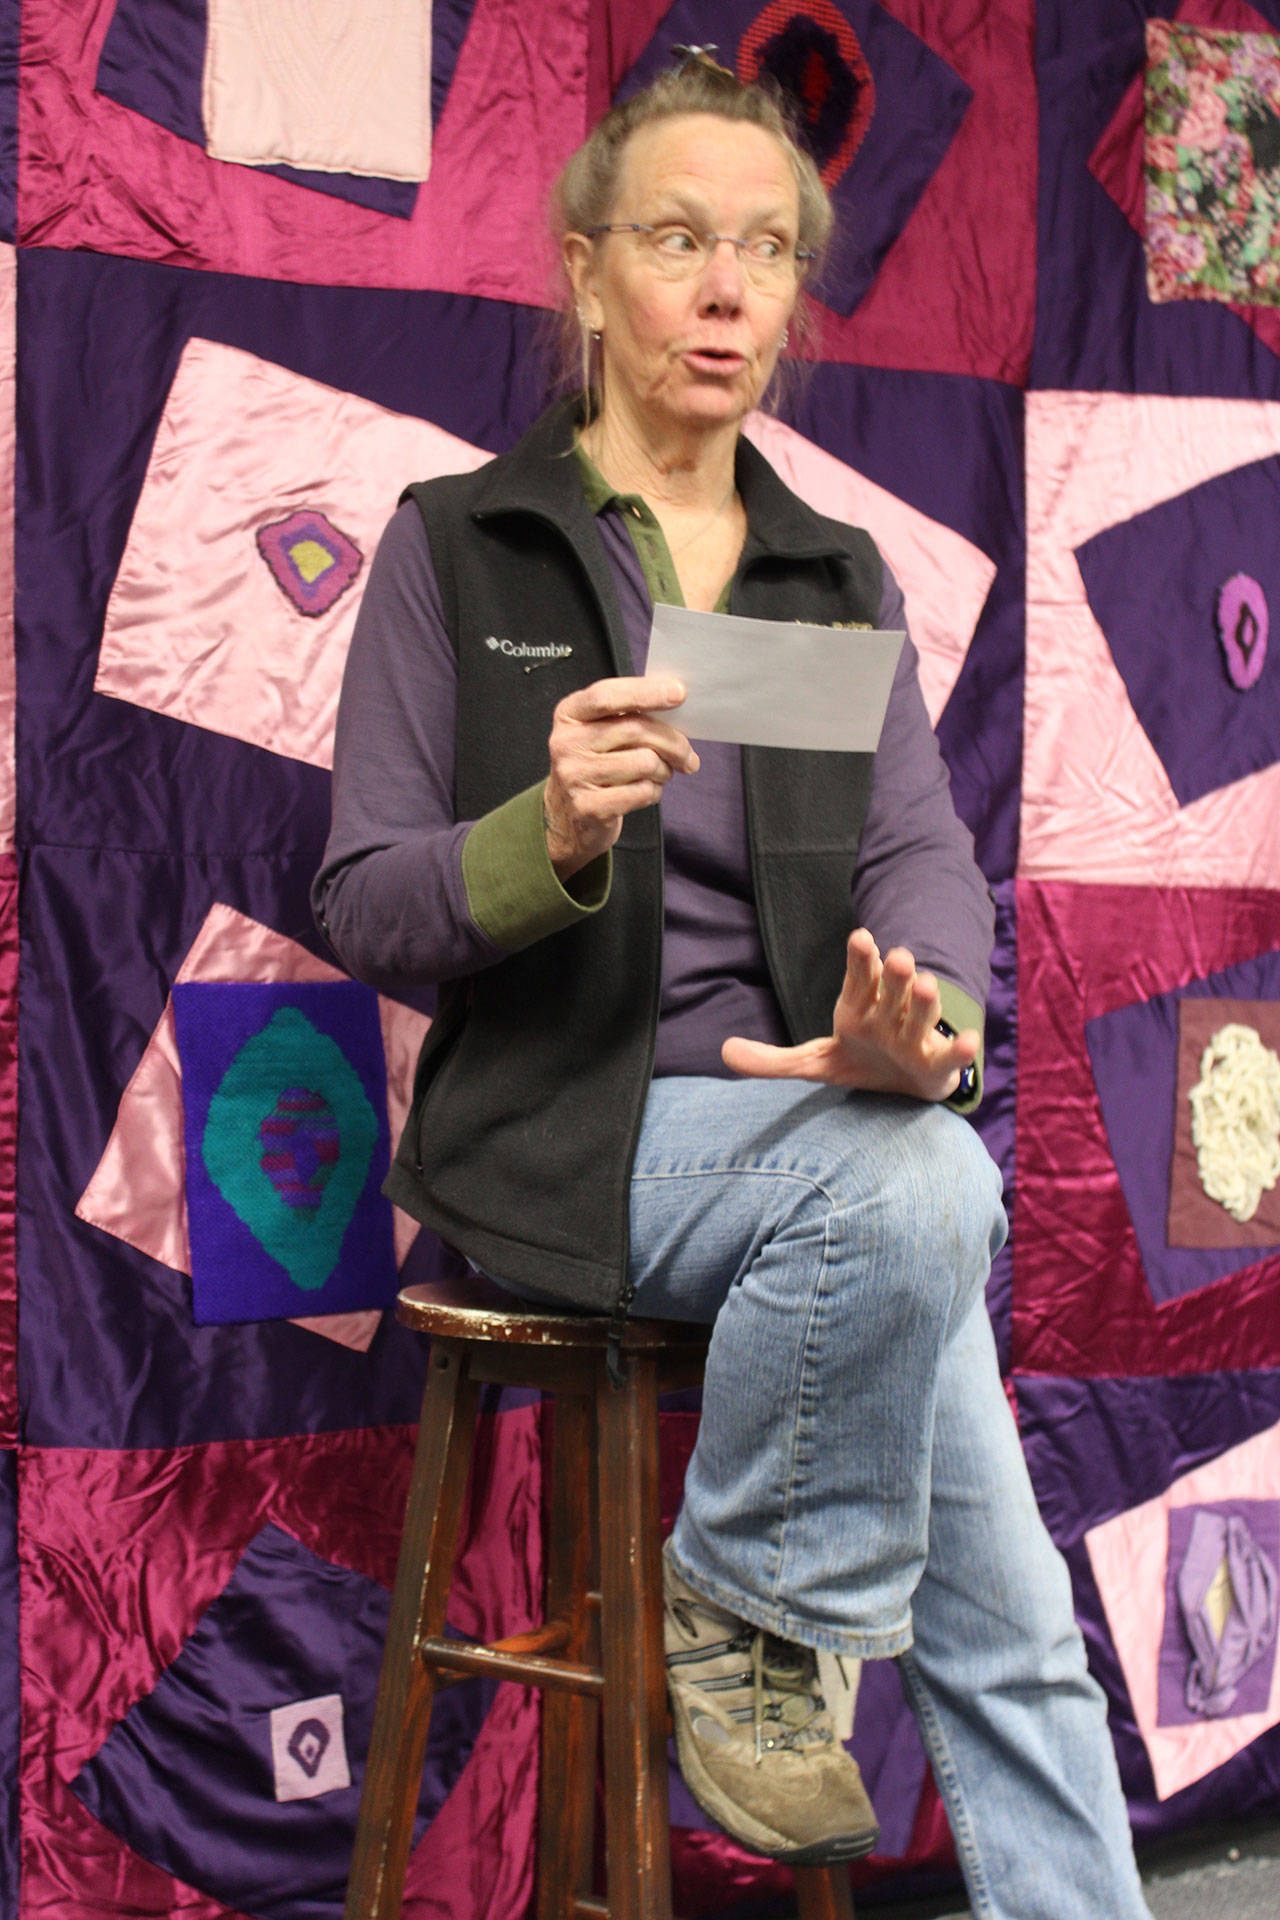 Diane Leganza reads from “The Vagina Monologues” in front of the vagina quilt she made for a college art project. Photo by Patricia Guthrie/Whidbey News-Times